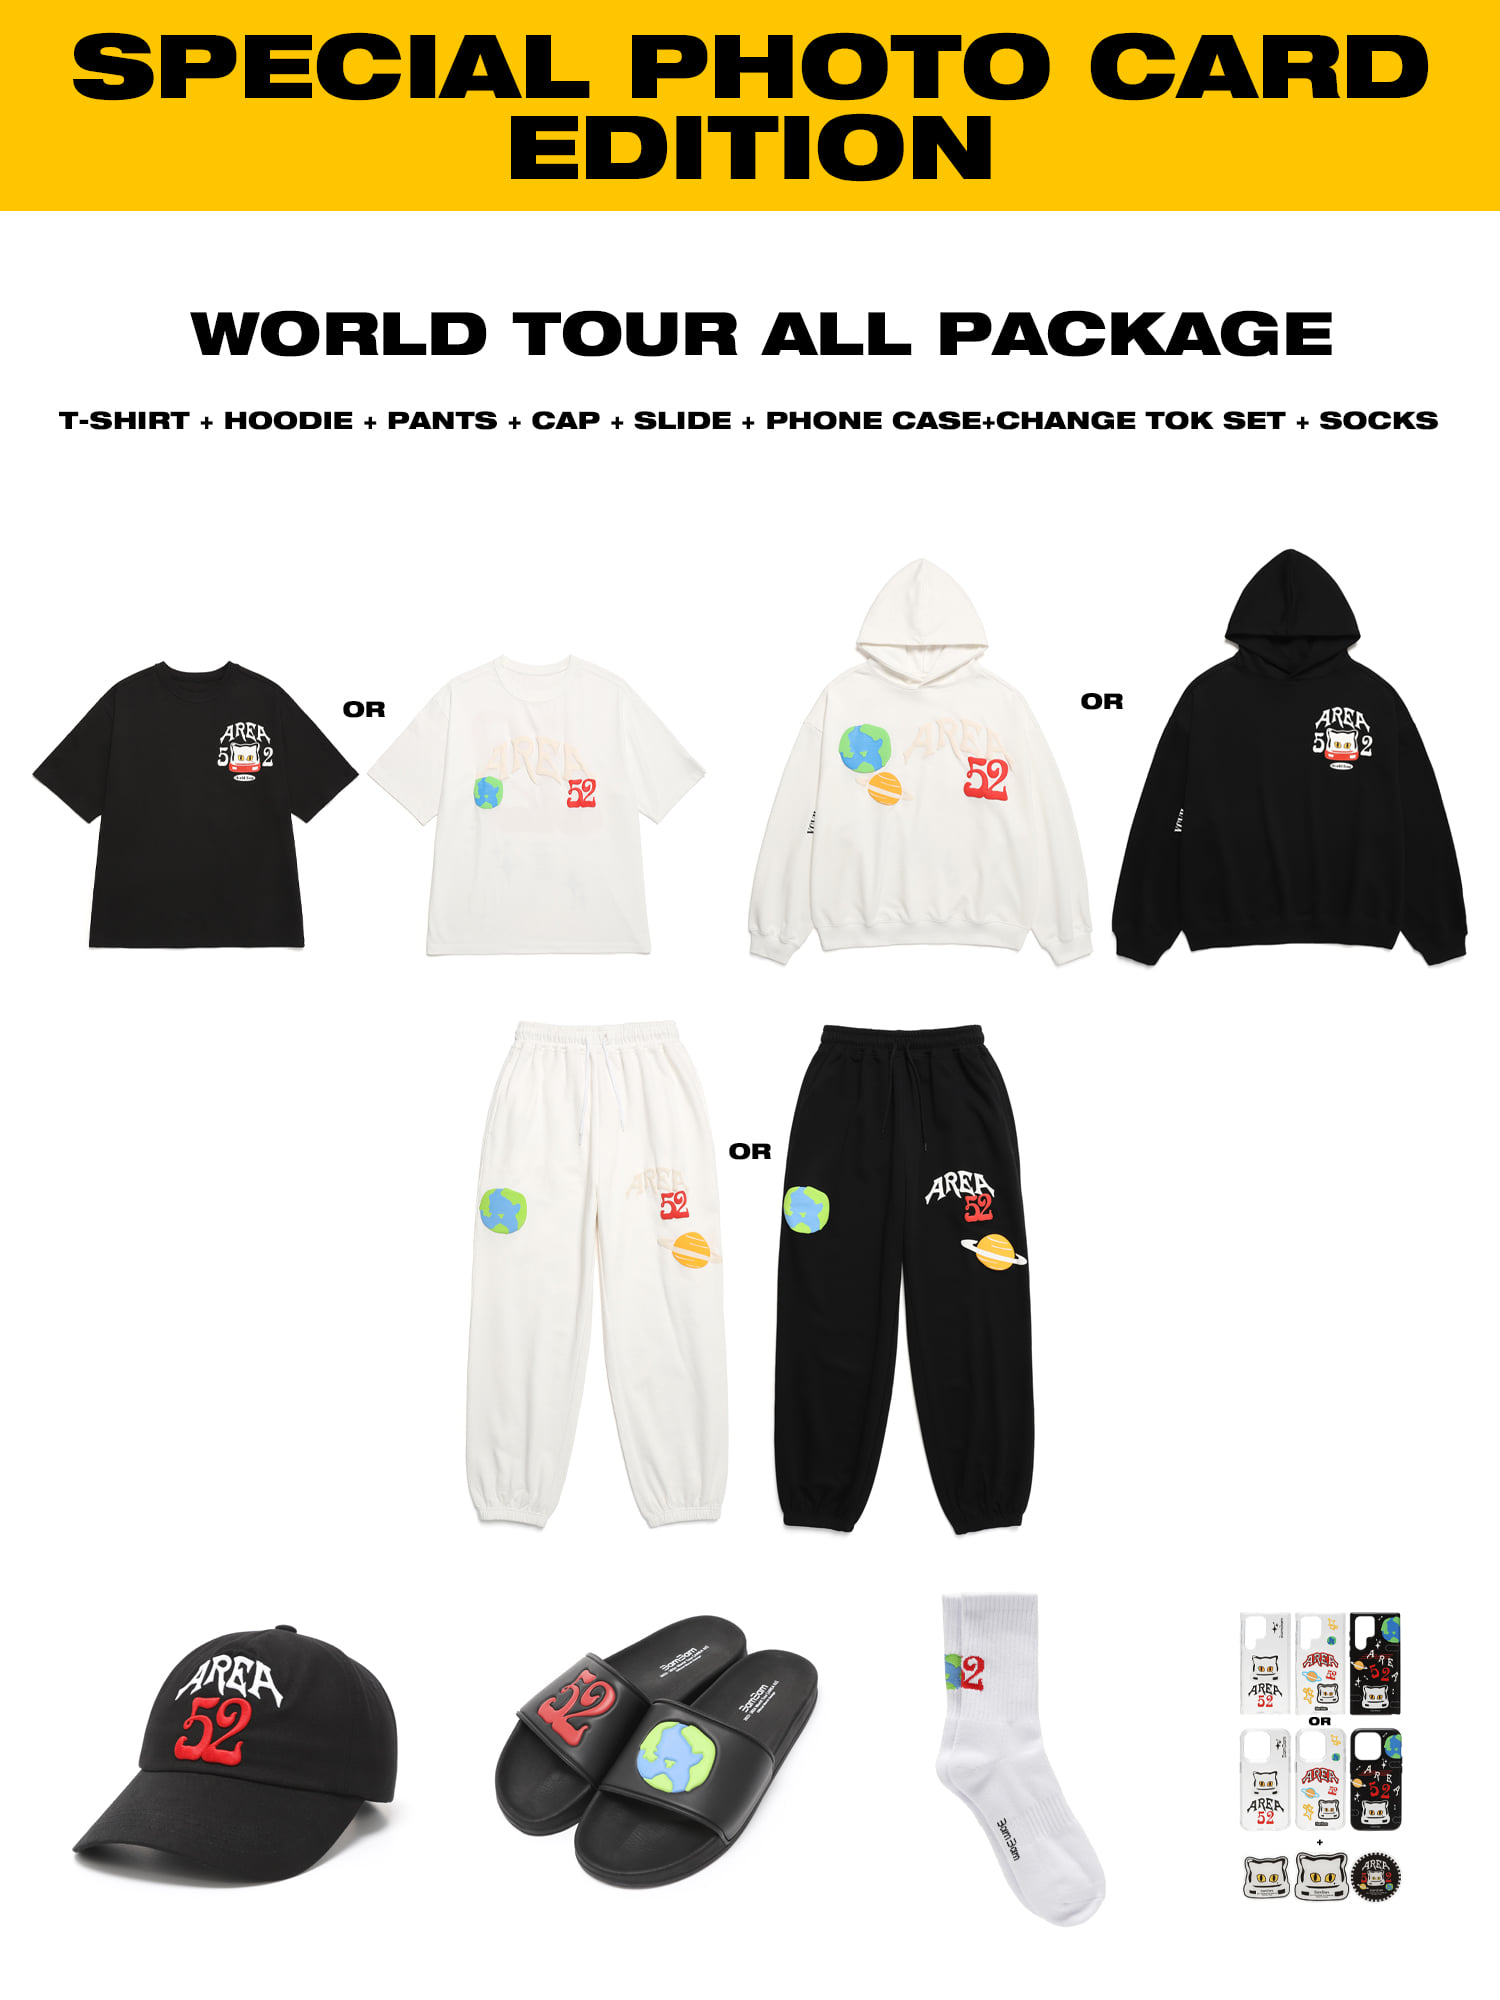 WORLD TOUR ALL PACKAGE